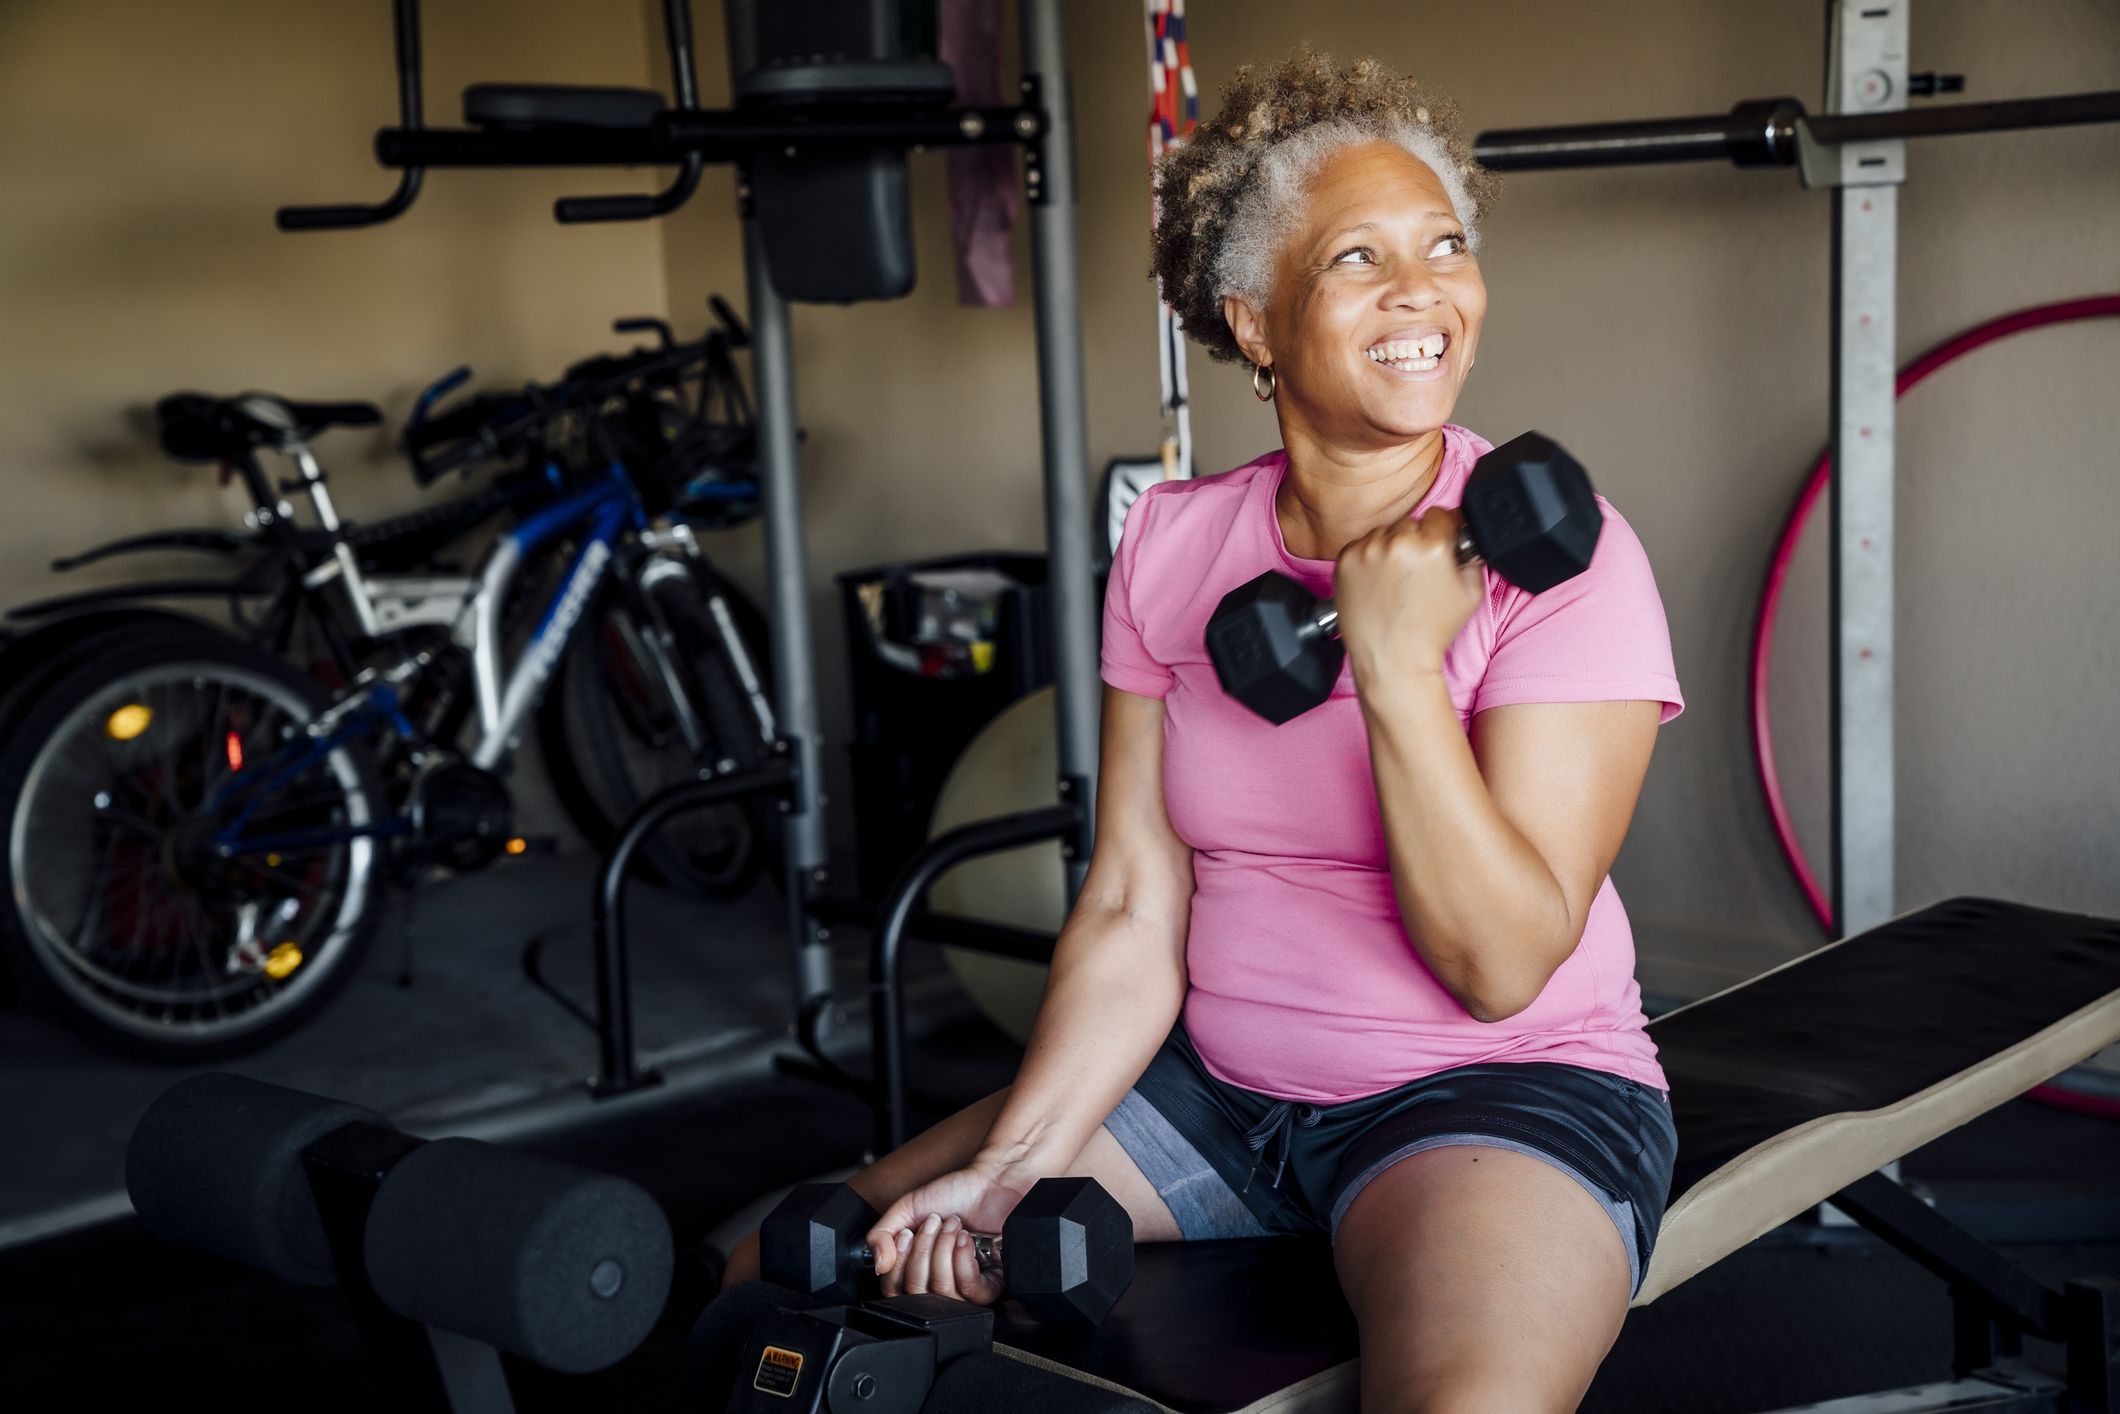 https://hips.hearstapps.com/hmg-prod/images/black-woman-lifting-weights-in-garage-royalty-free-image-1677604364.jpg